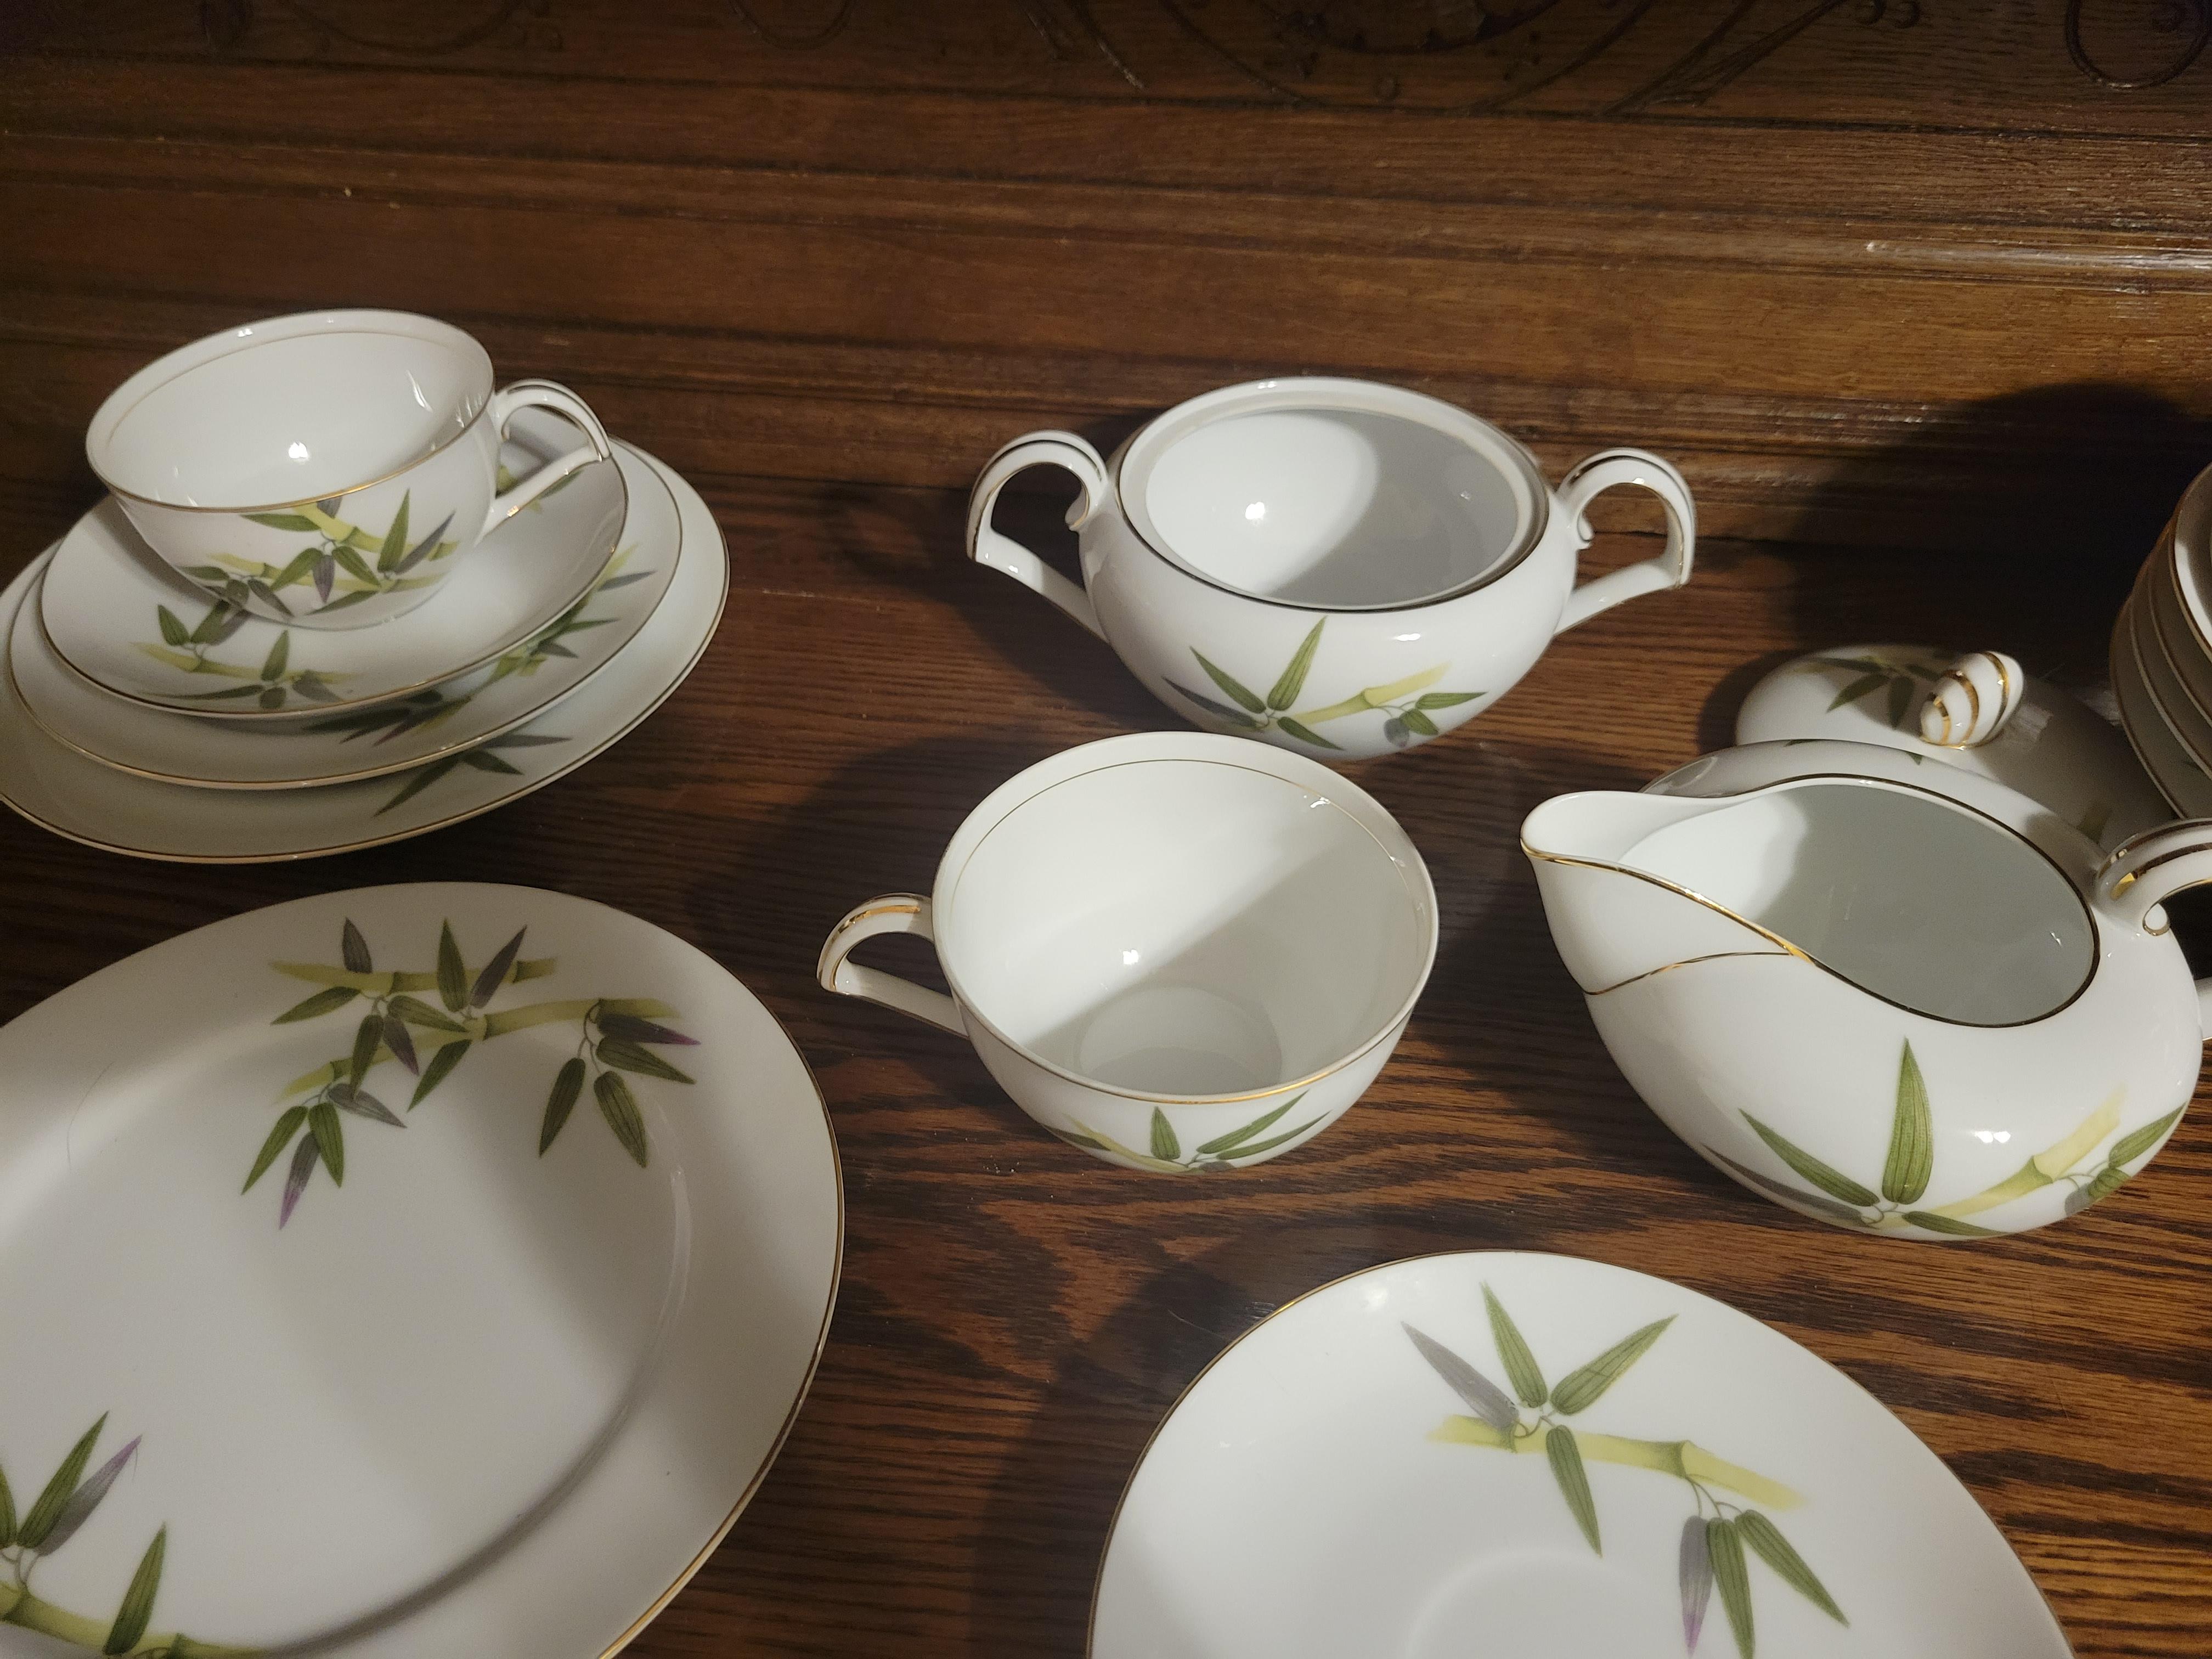 1951 Narumi Japan 'Spring Bamboo' Fine China Set - 24 pieces plus replacements  For Sale 8